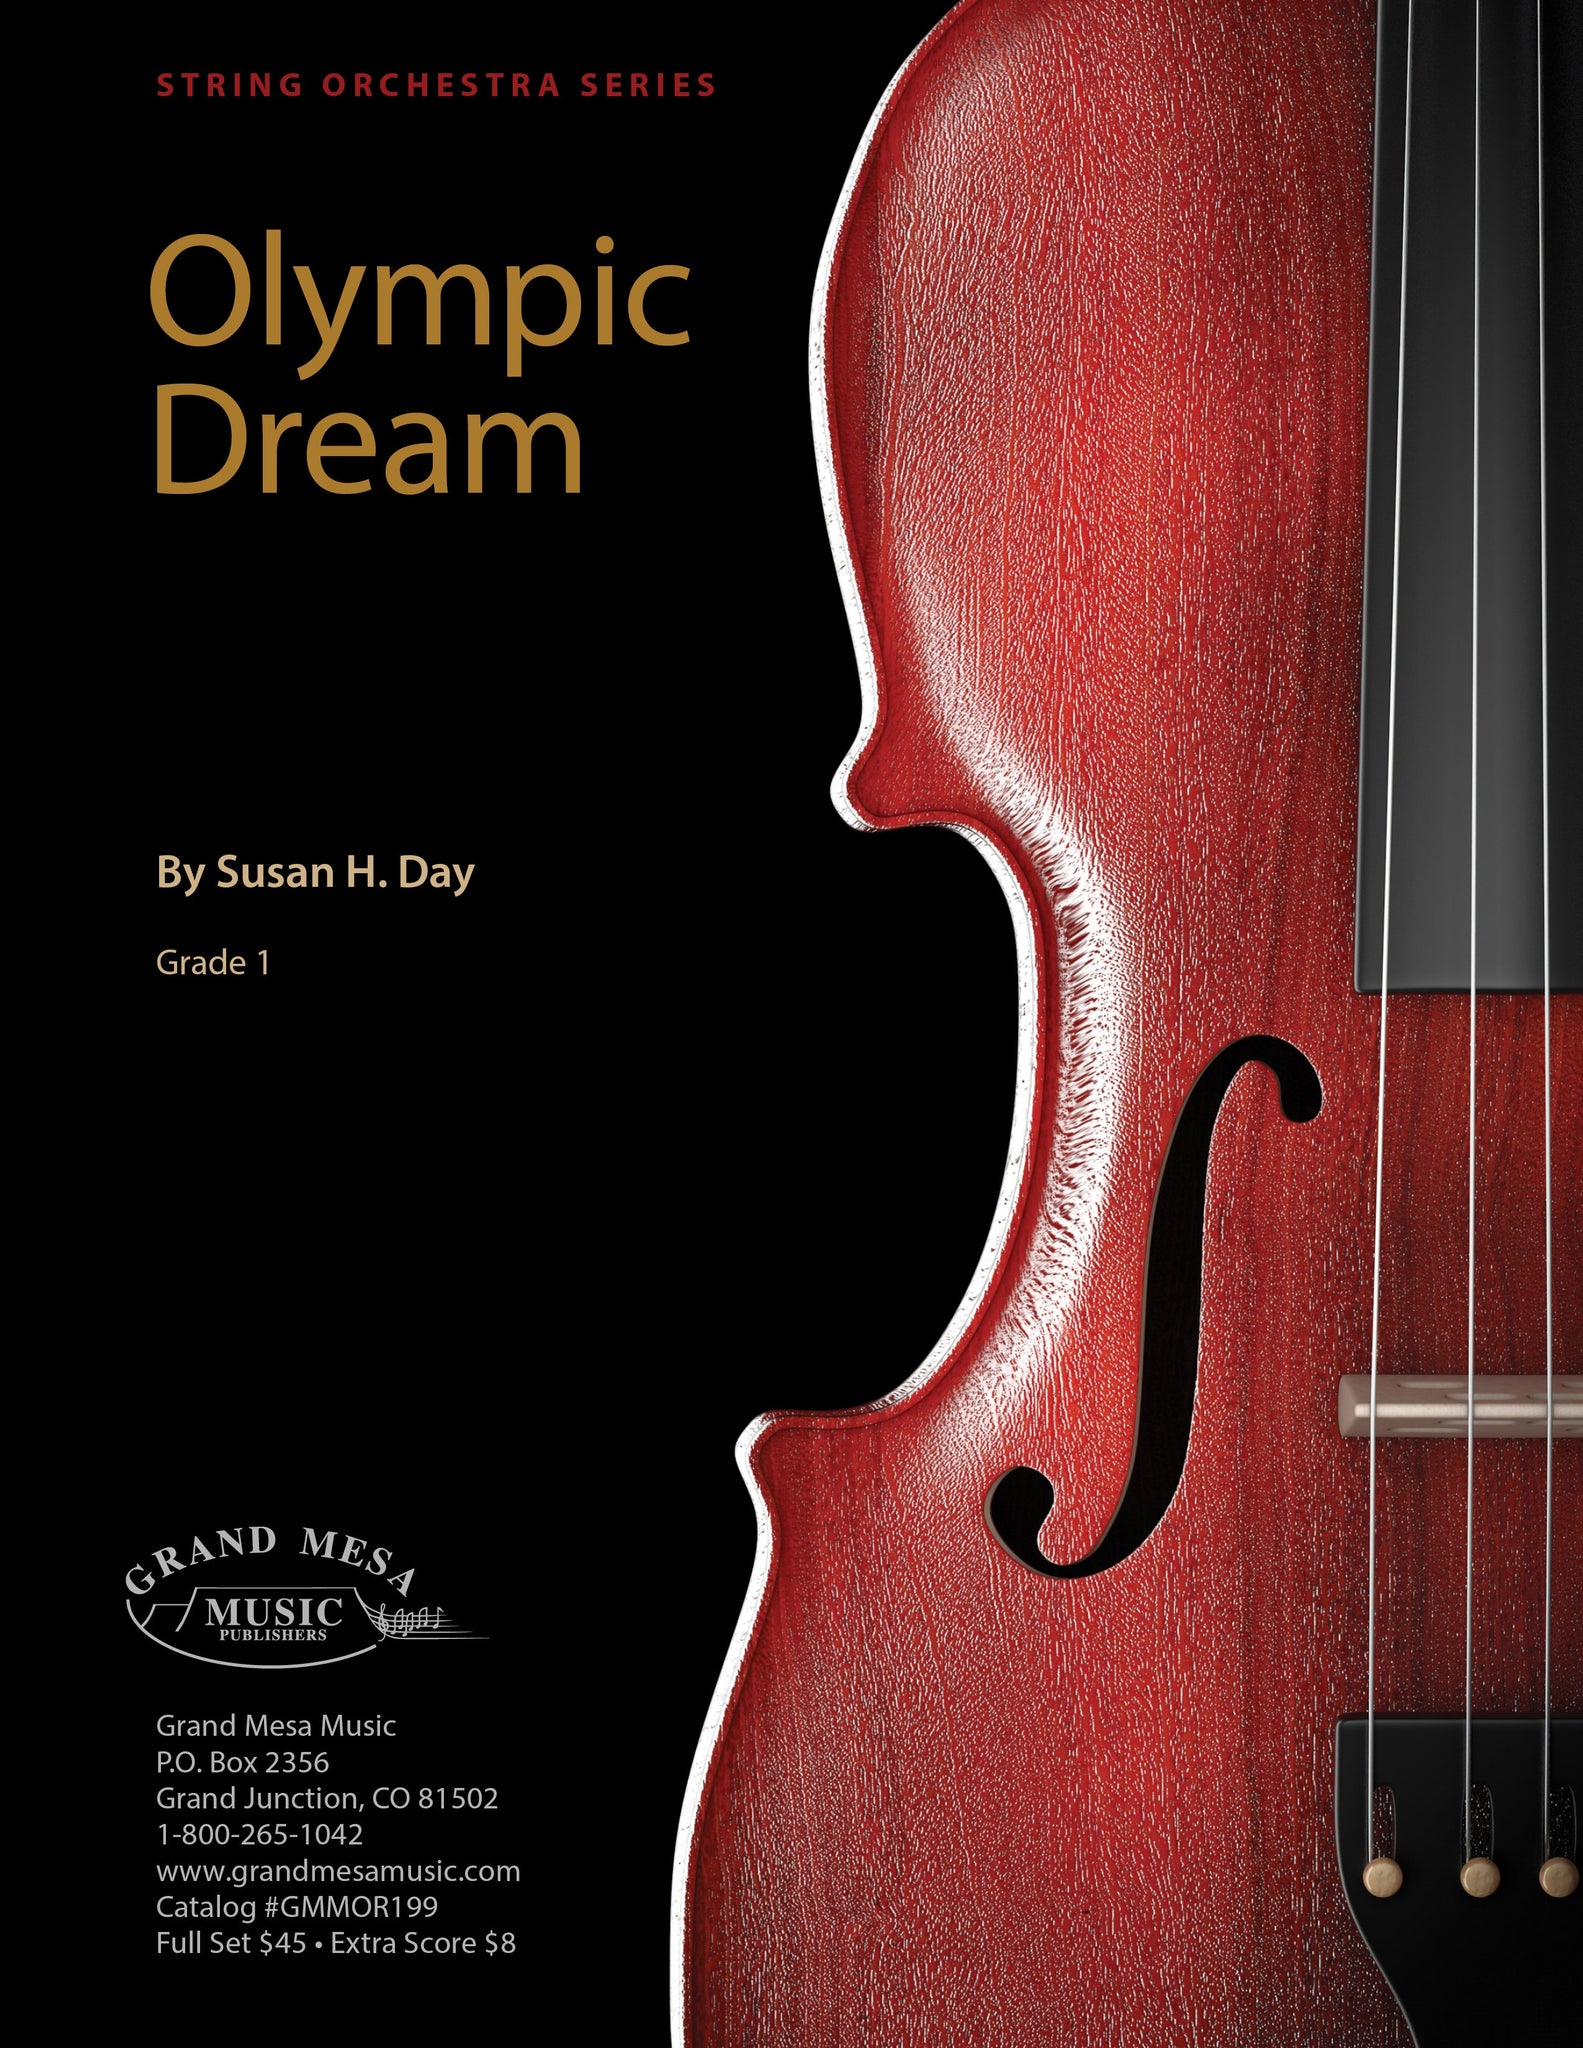 Strings sheet music cover of Olympic Dream, composed by Susan Day.